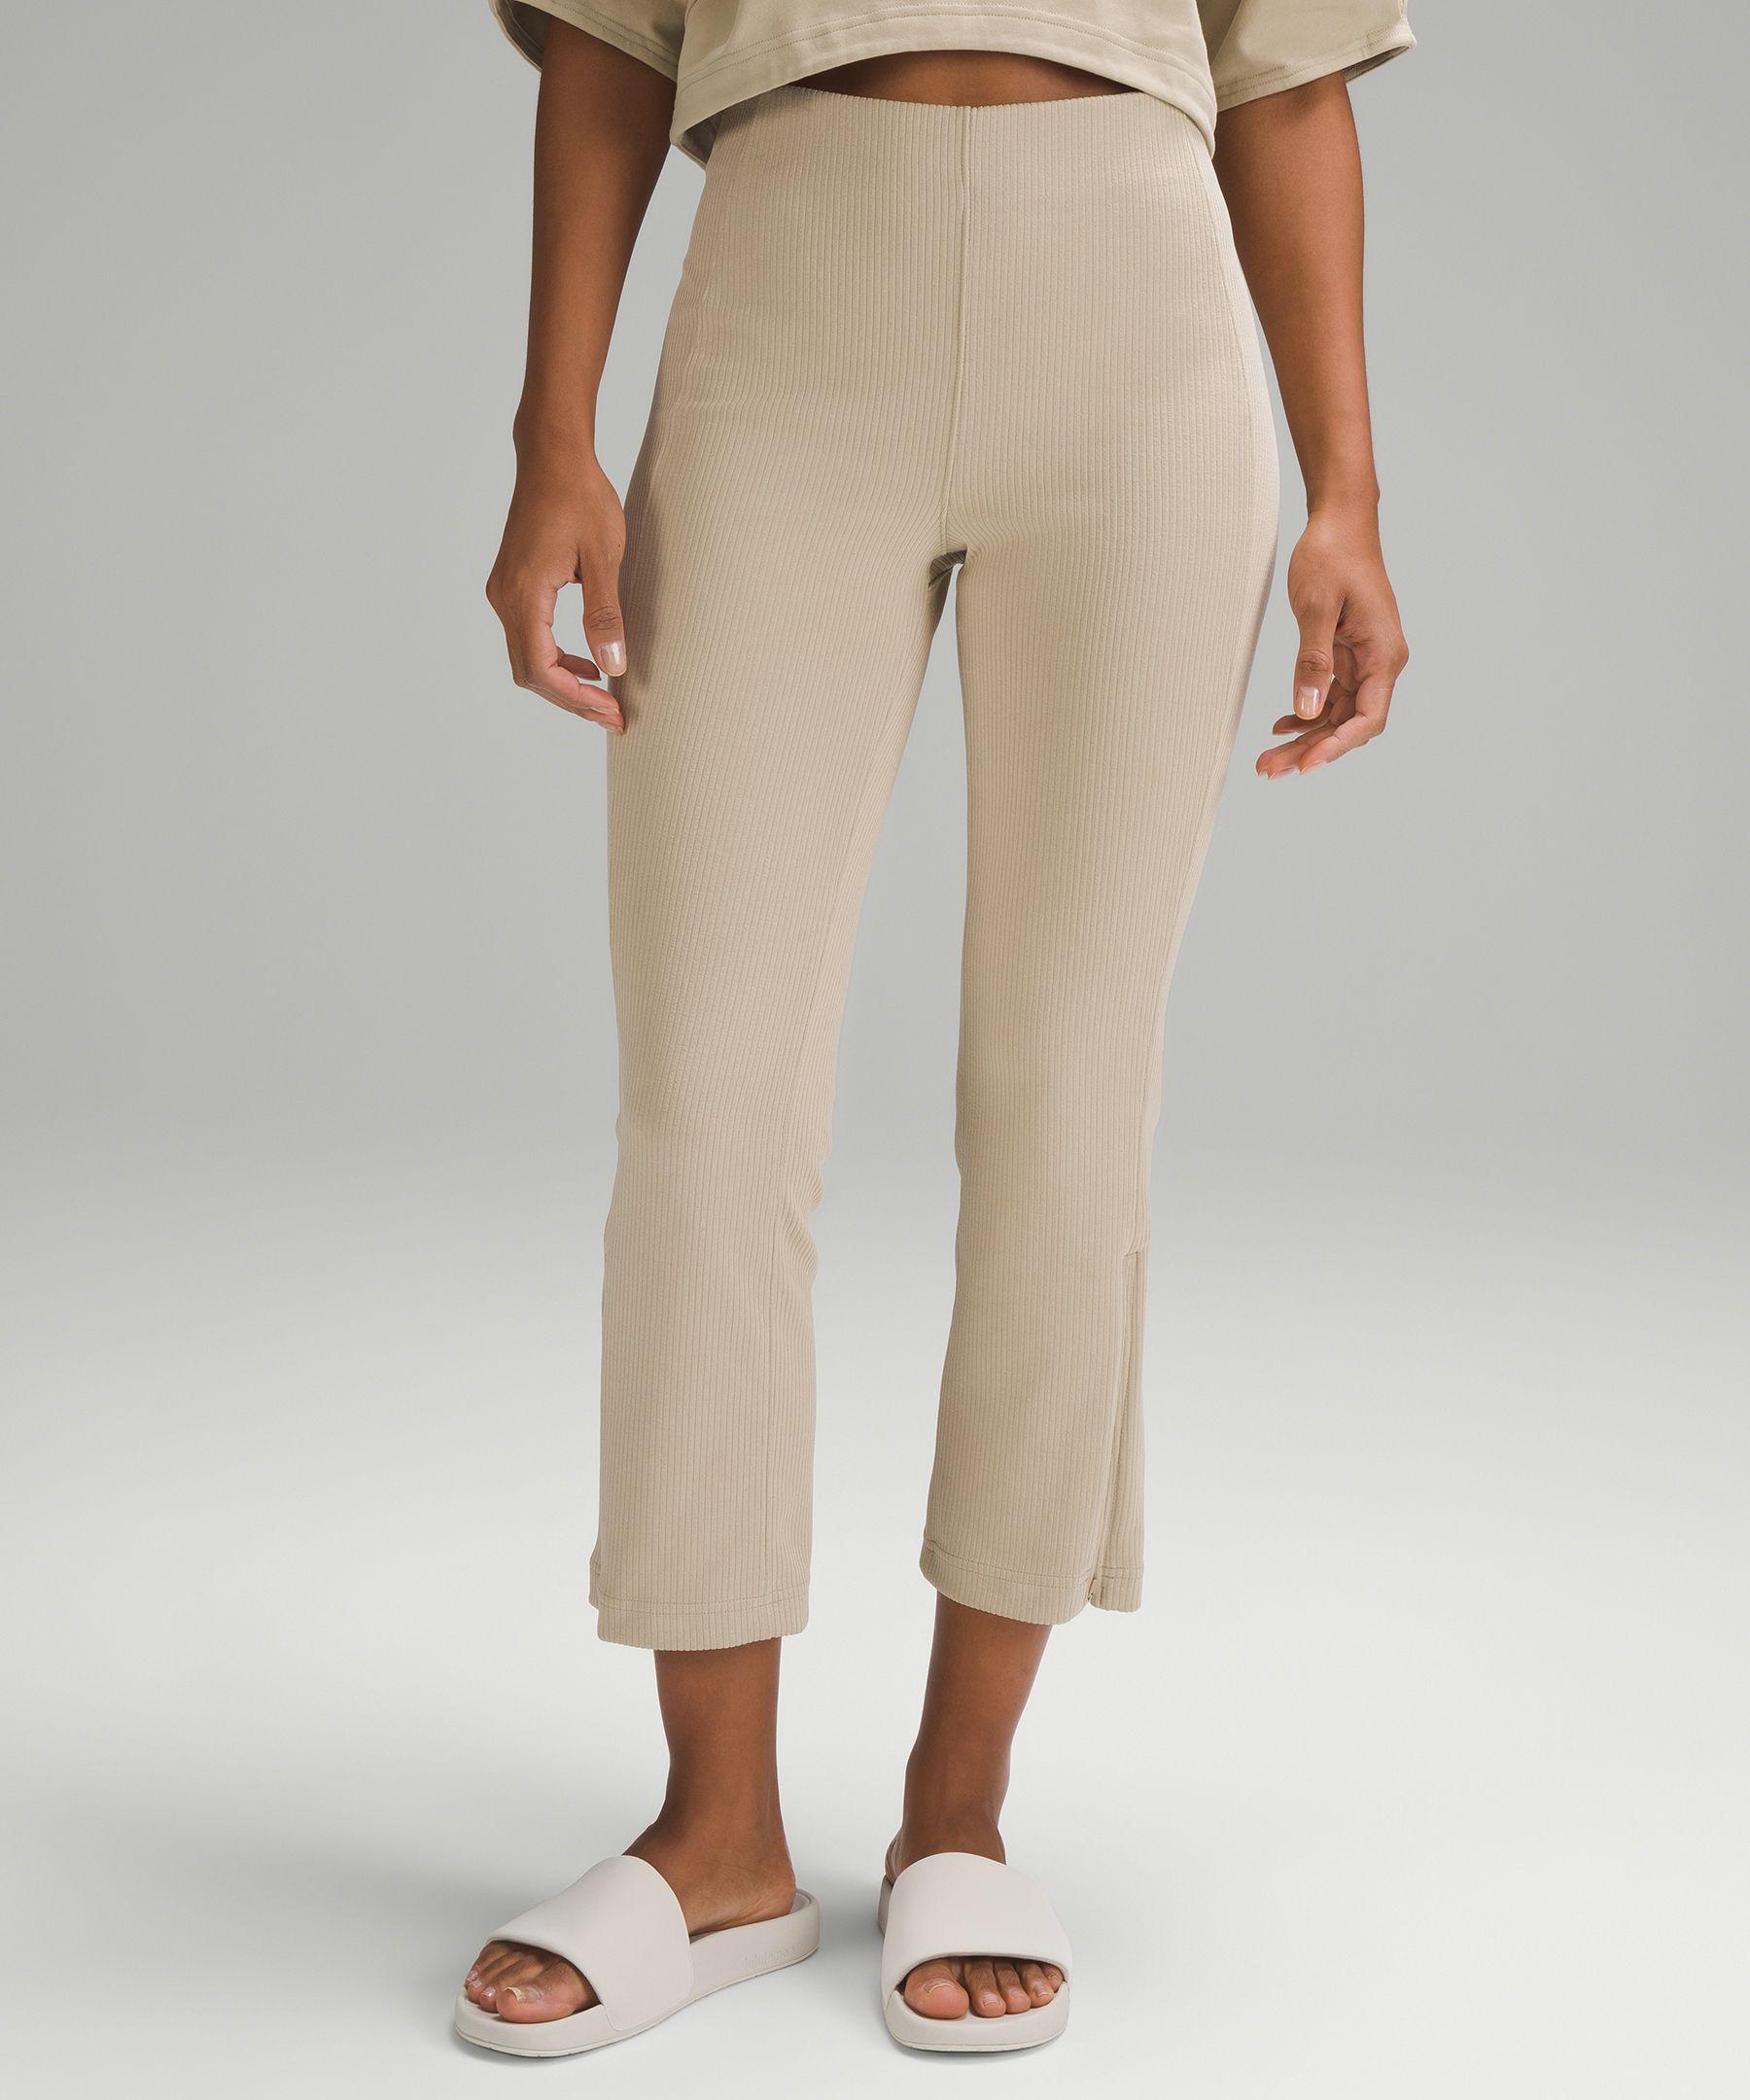 lululemon athletica Ribbed Softstreme Zip-leg High-rise Cropped Pants - 25  - Color Khaki - Size 0 in Natural